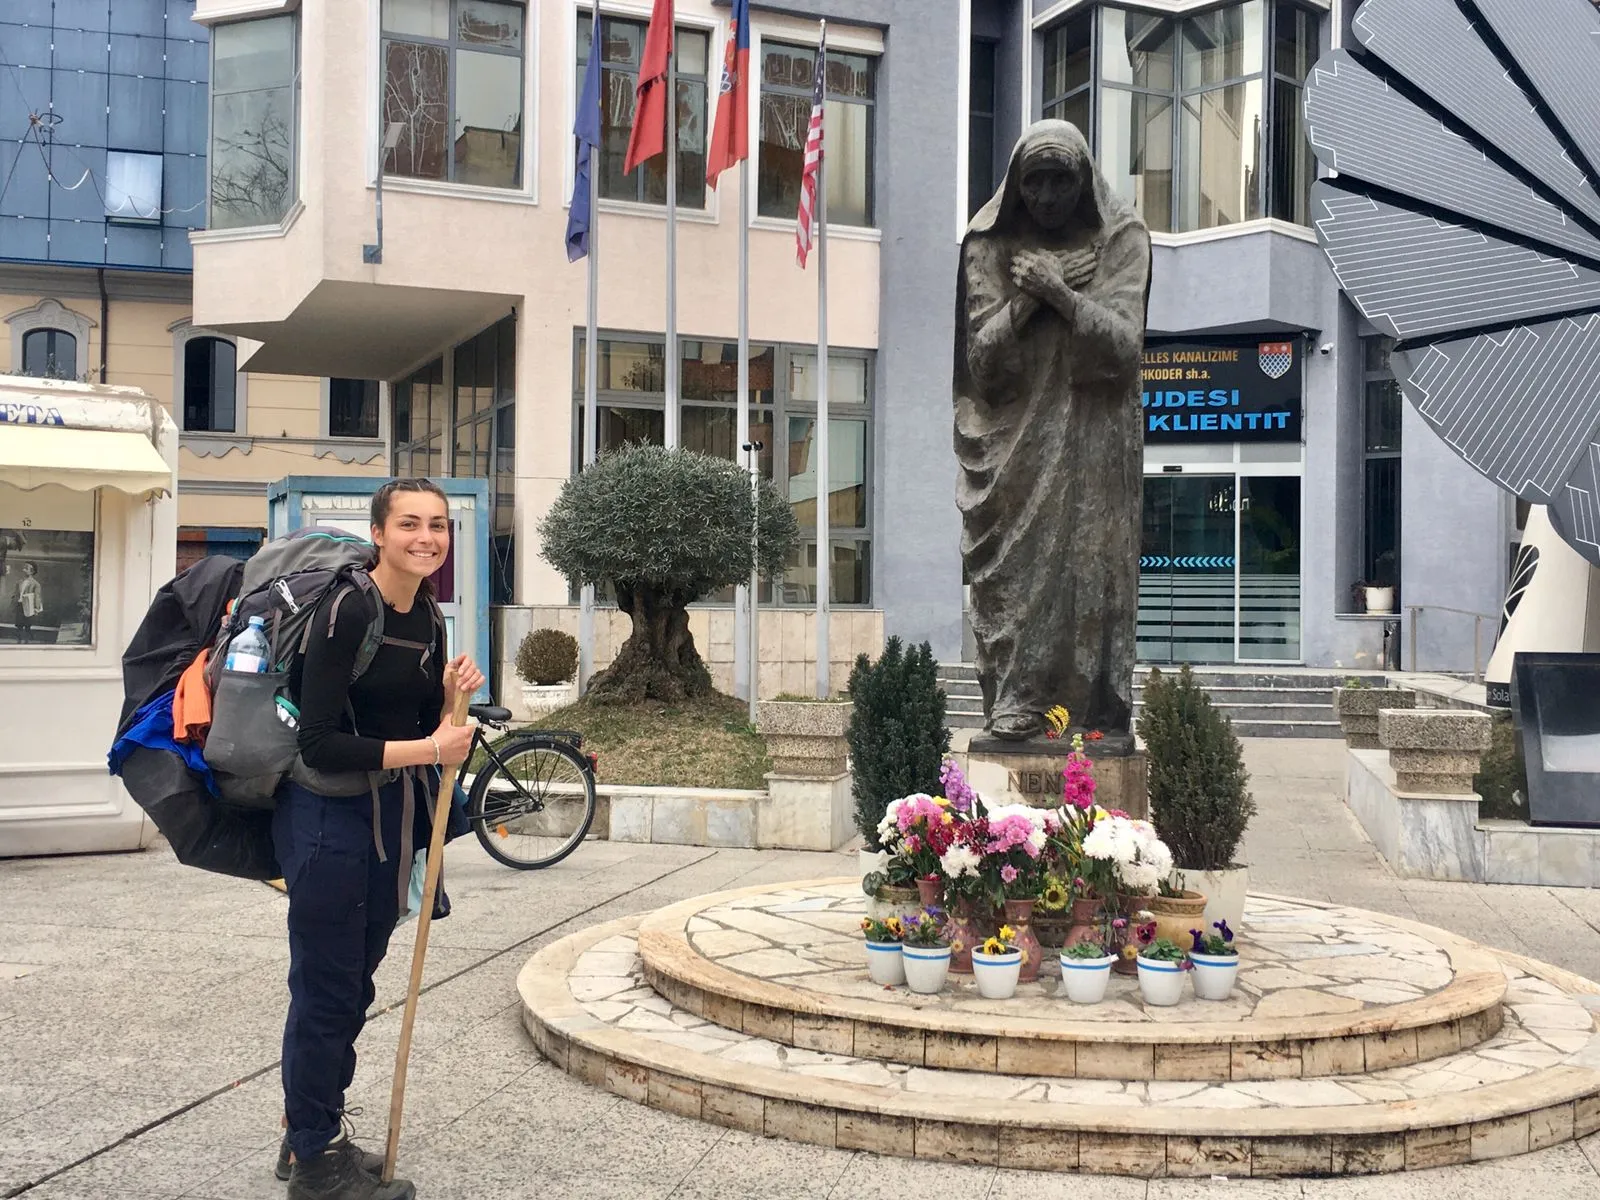 The arrival of Madeleine and Marie-Liesse in Albania. In the photo, Marie-Liesse is in front of a statue of Mother Teresa, who was originally from this country. "Every evening, we knocked on people’s doors asking for shelter, a bed, and food. The Lord always provided," they told CNA. Credit: Photo courtesy of French pilgrims Madeleine and Marie-Liesse